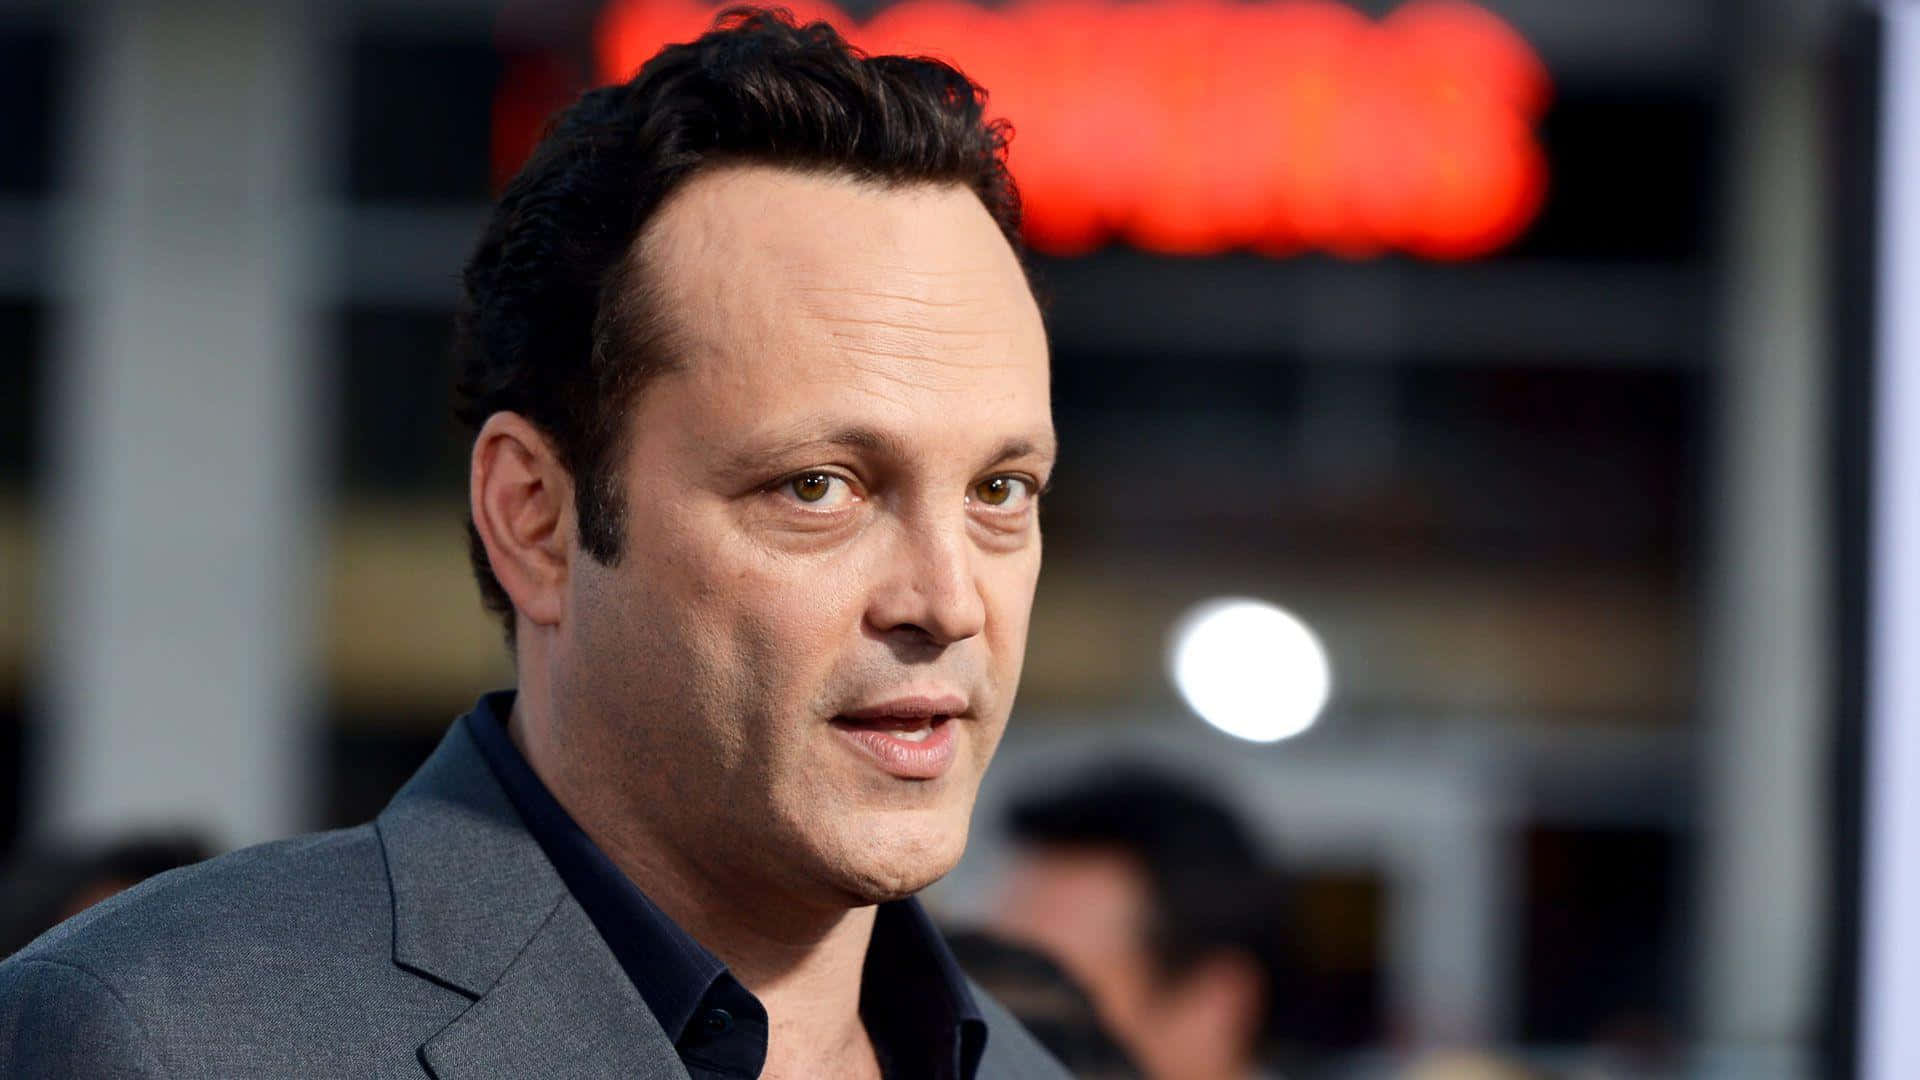 Vince Vaughn striking a pose for the camera Wallpaper